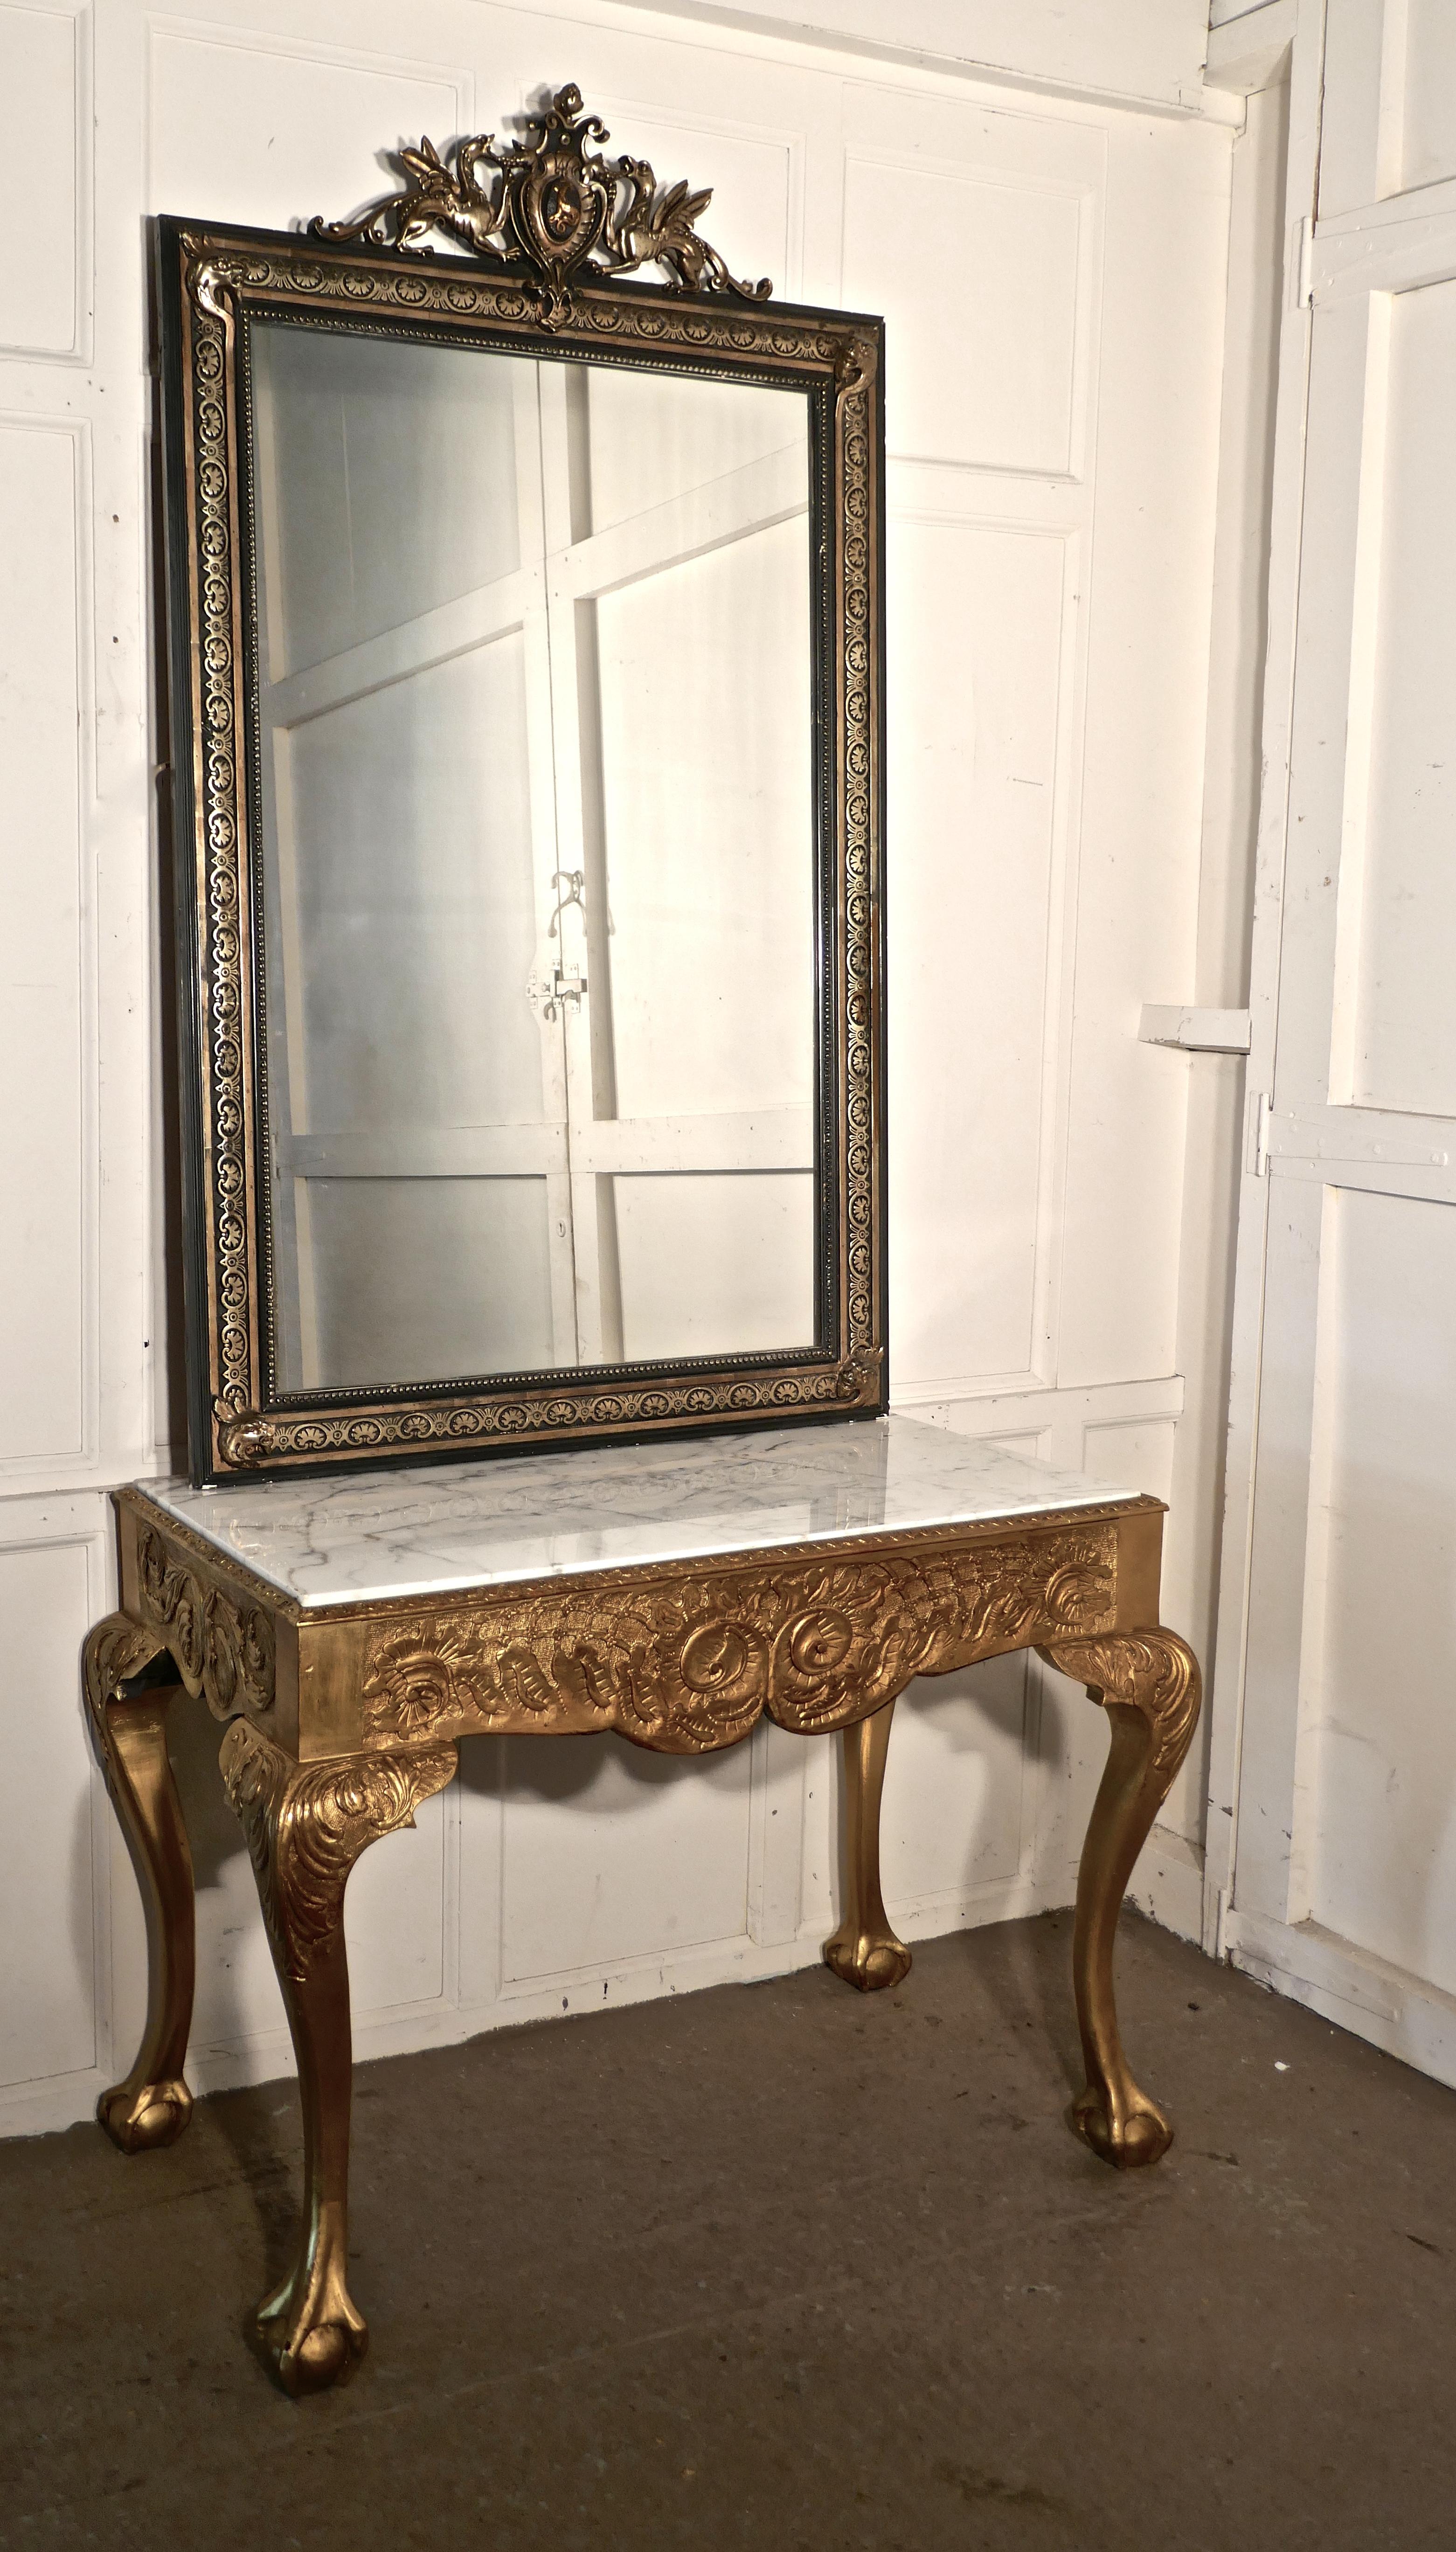 19th century French marble-top gilt console or hall table

This is a very attractive piece, the table is a hard wood carved with a bold scroll and shell decoration, at the front and acanthus leaf carving to the knees of the elegant cabriole legs